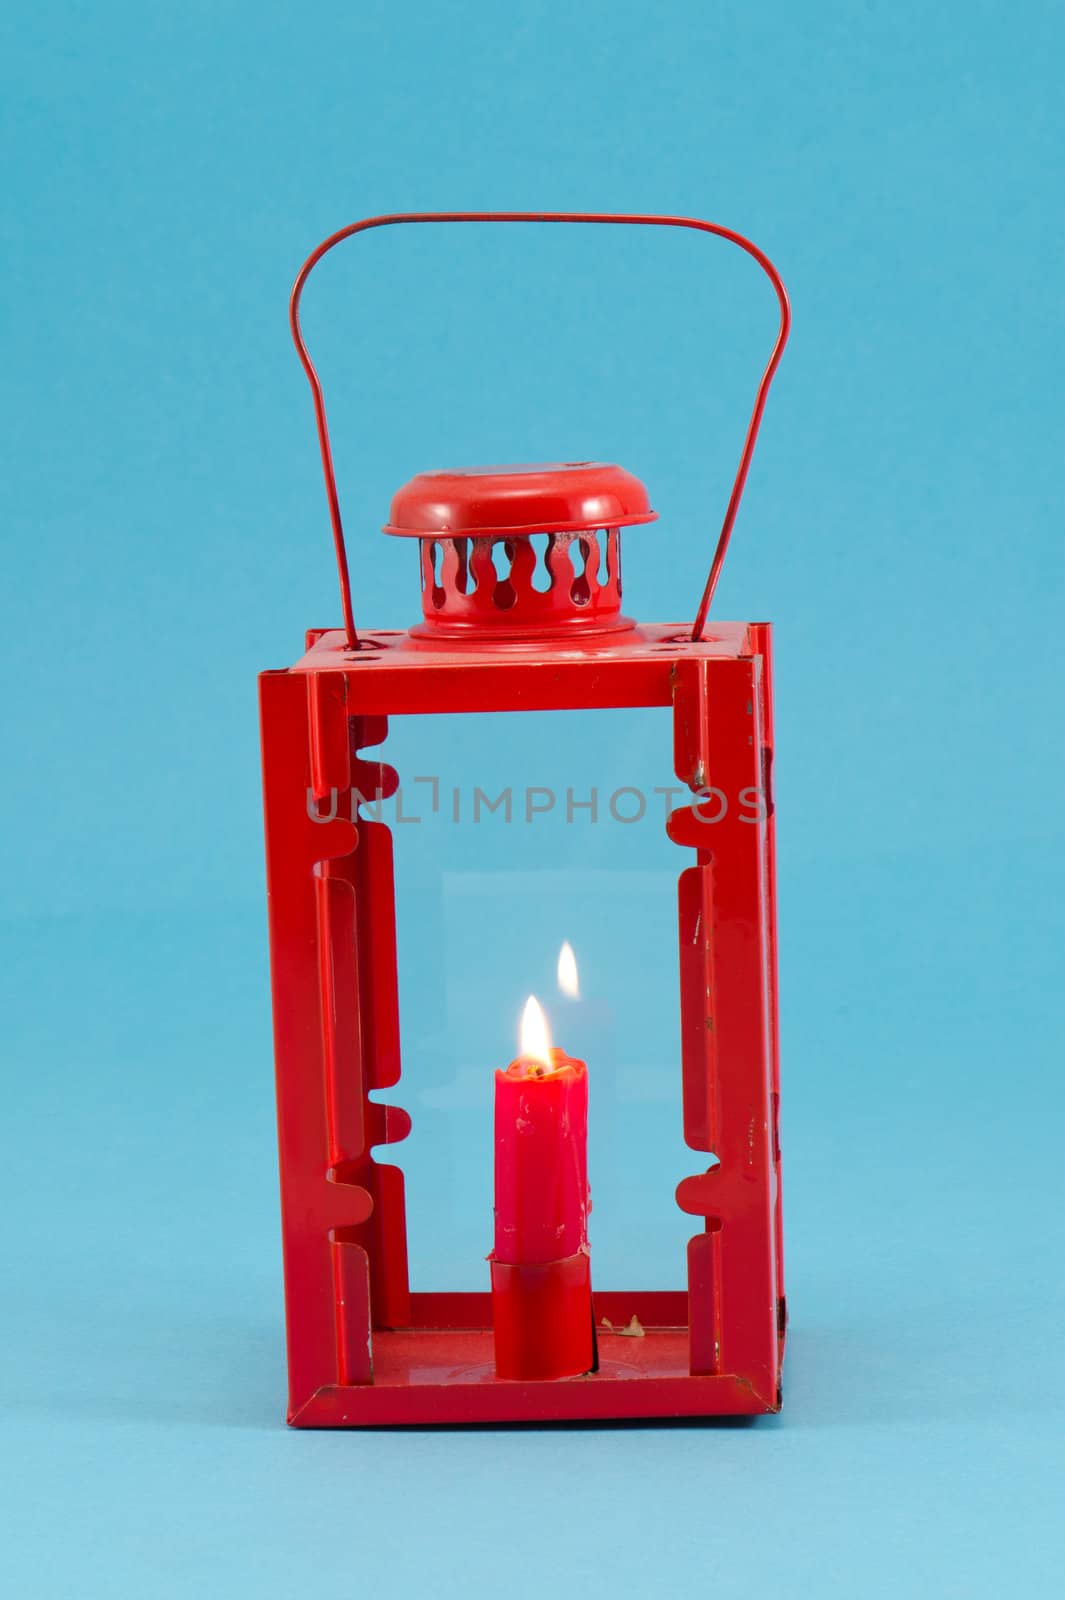 steel red retro candlestick lamp with handle and candle burn on blue background.